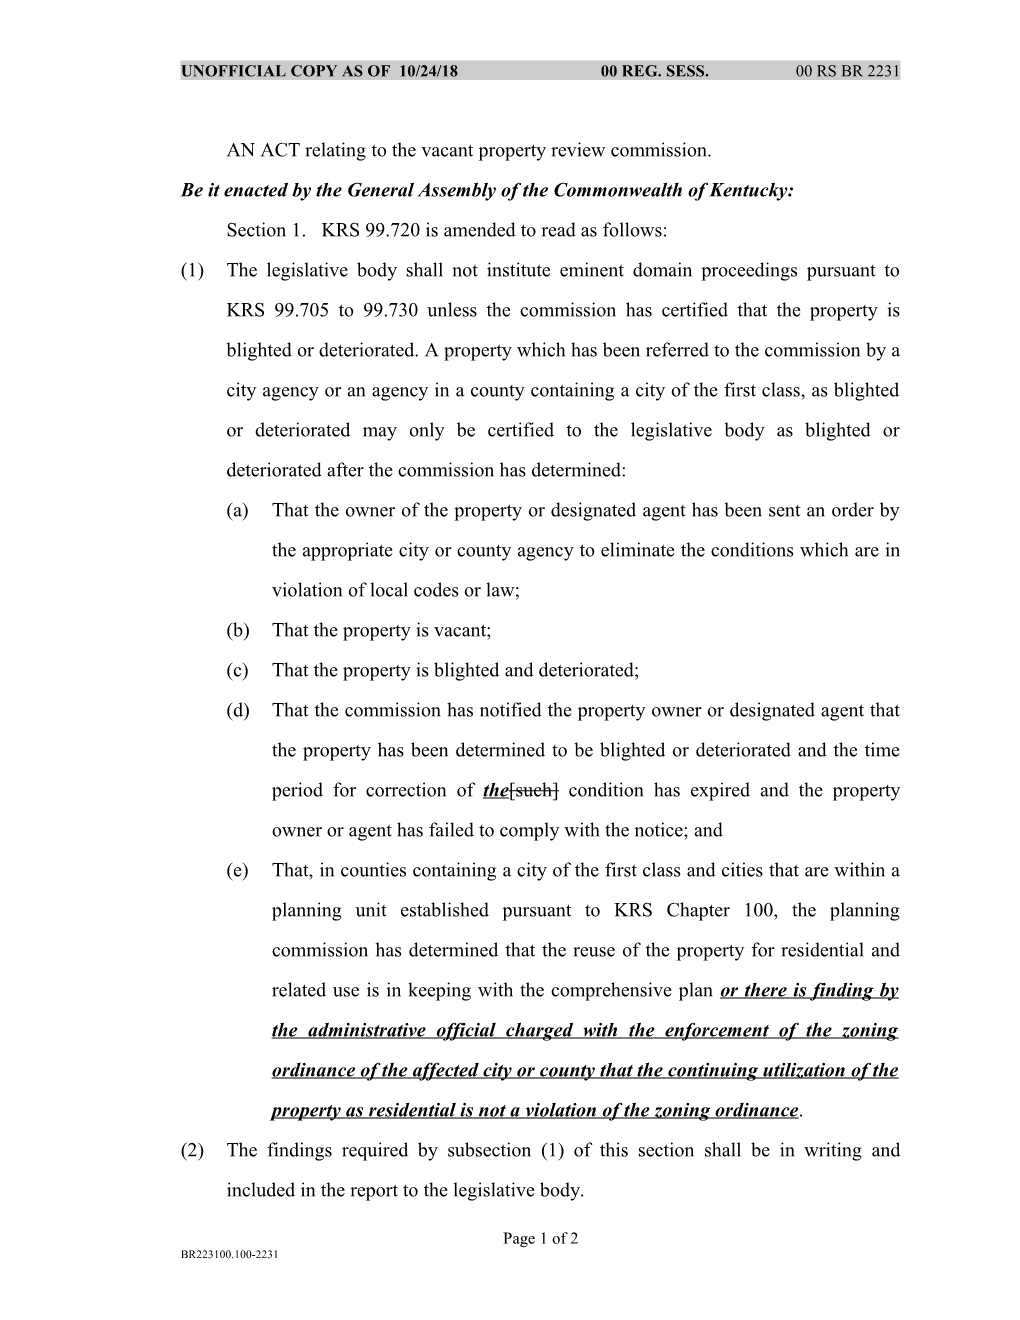 AN ACT Relating to the Vacant Property Review Commission